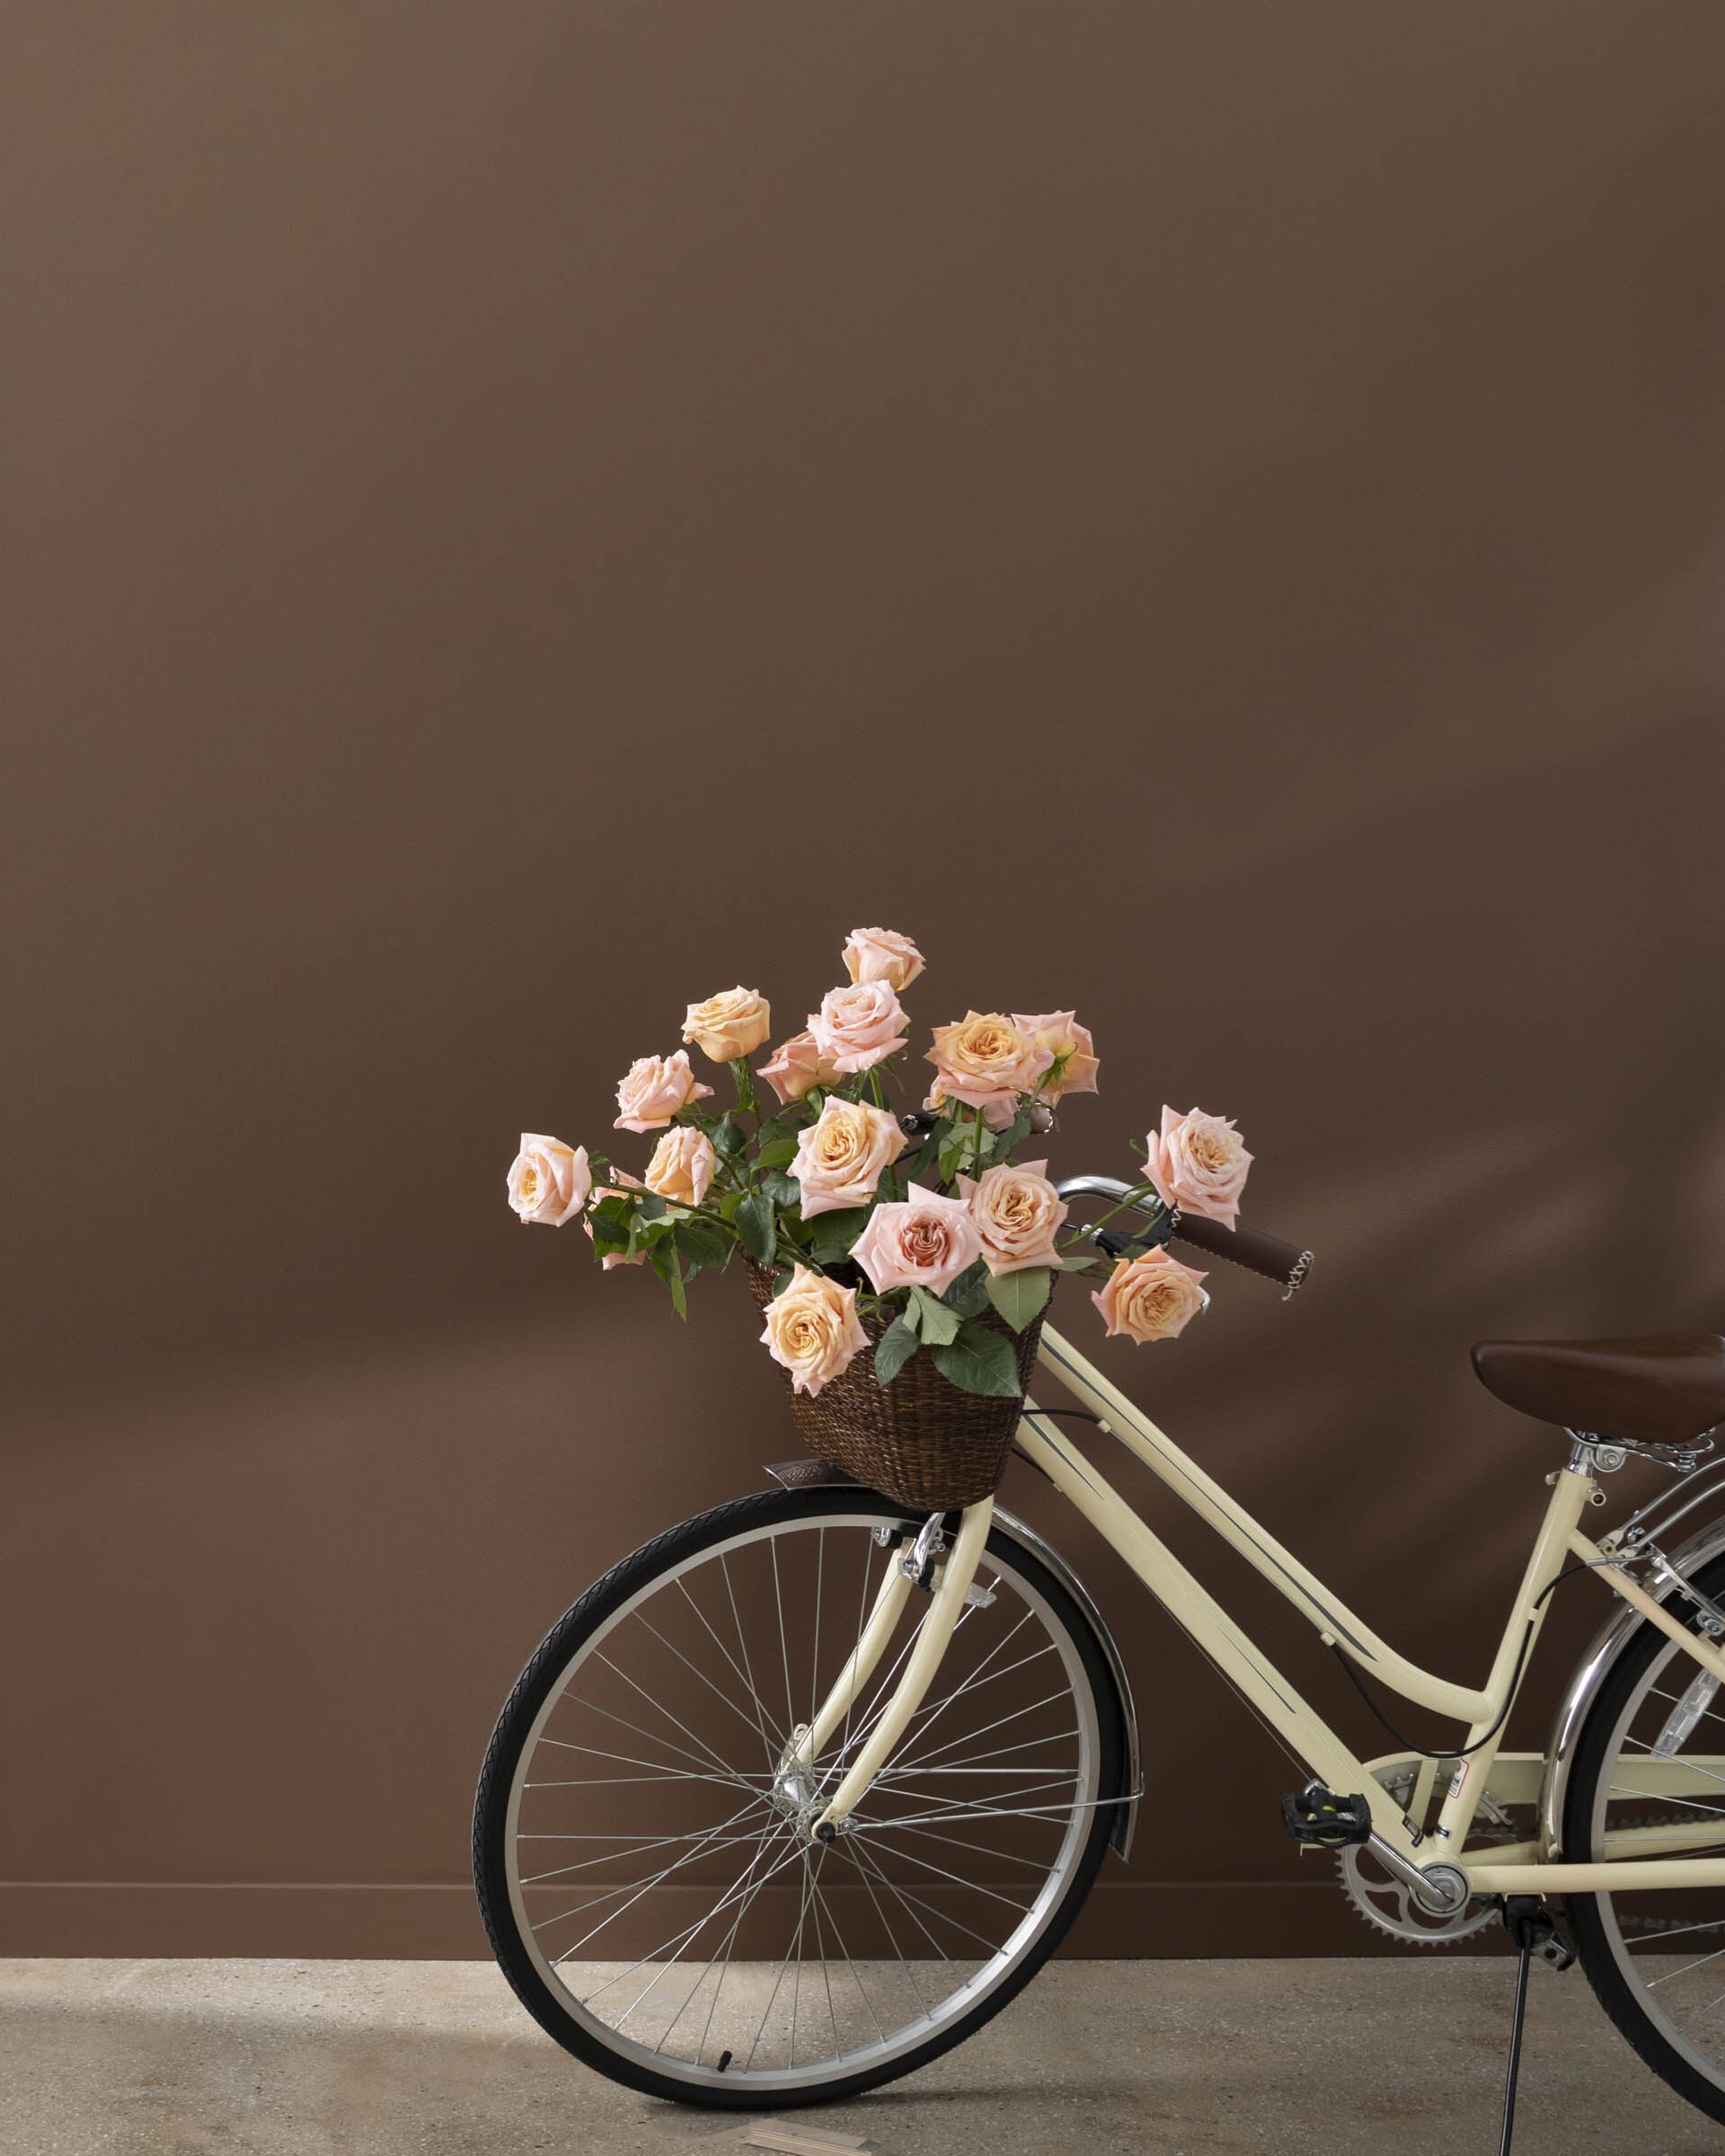 bike with flowers in basket in front of brown wall